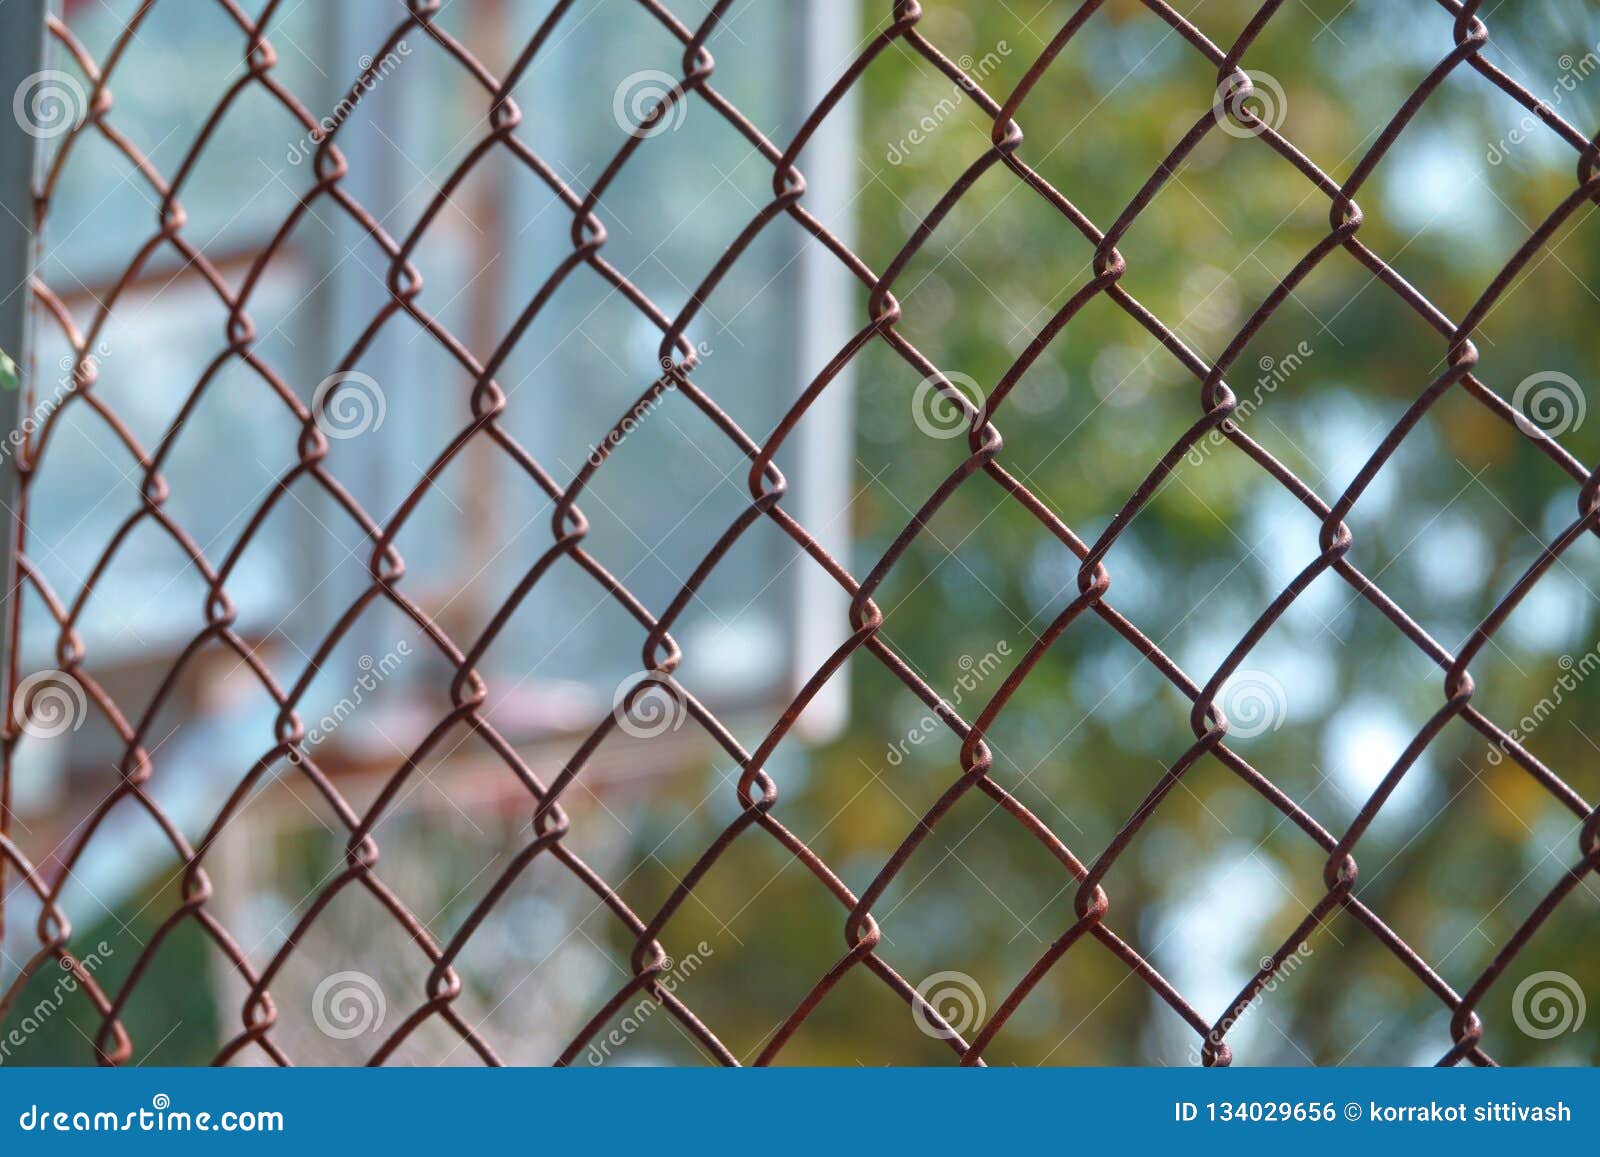 Steel Wire Net Fence With Blurred Green Background Stock Photo - Image ...
